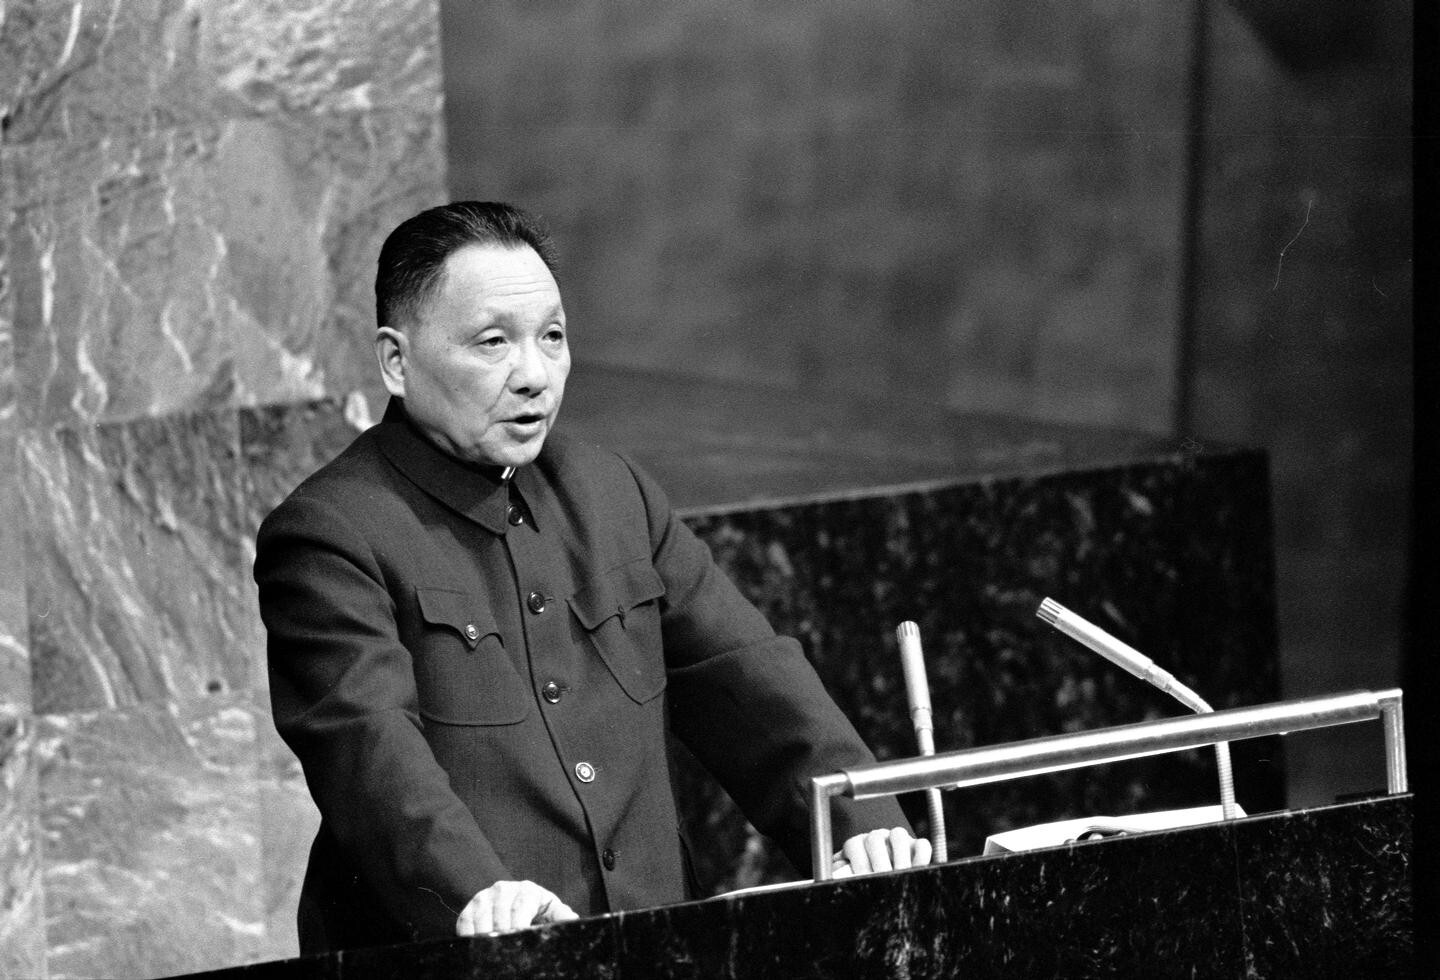 Deng Xiaoping (pictured) was wrestling for control of China with Hua Guofeng when Anne E. McLaren was a PhD research student in Shanghai, from 1978 to 1979. Her book, Slow Train to Democracy, recounts the dramatic drive for social change that took place there at the time. Photo: Xinhua